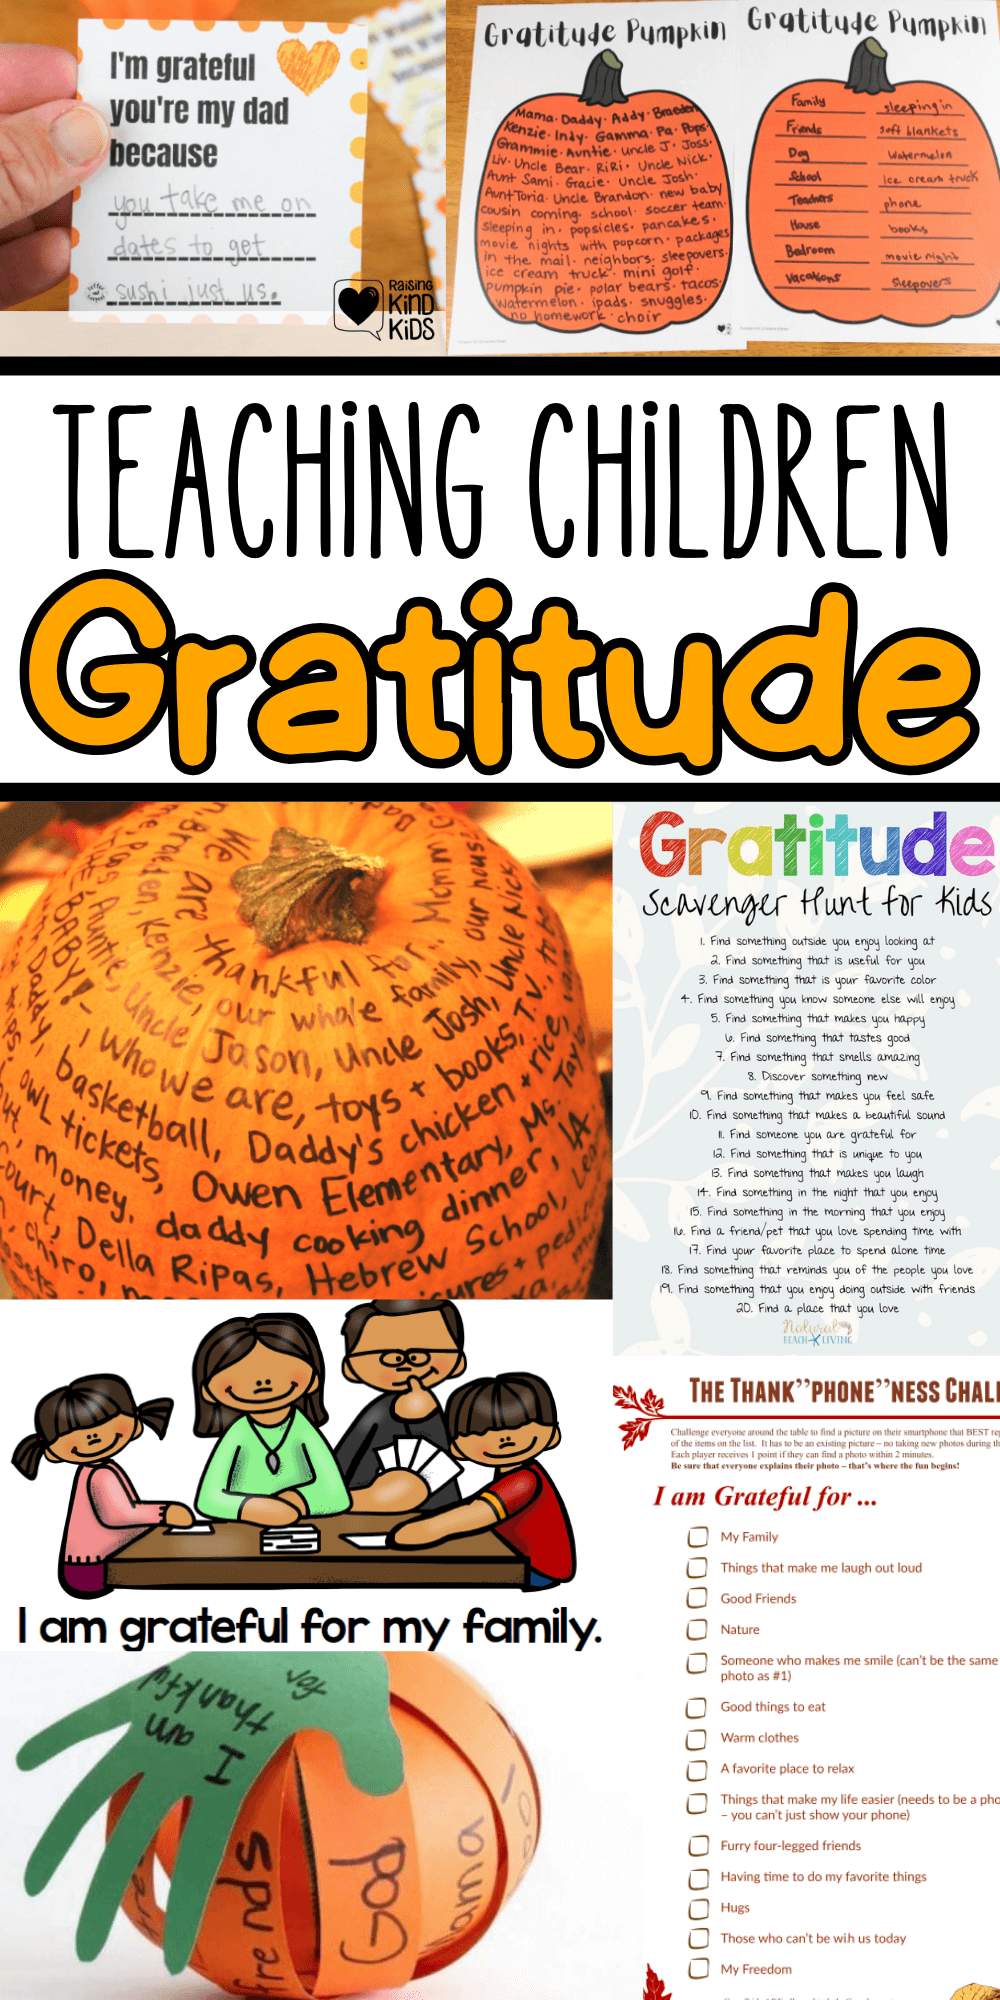 10 of the best and most meaningful year-round gratitude activities #gratitude #gratefulness #thankfulness #yearroundgratitude #teachignkidstobegrateful #teachingkidstobethankful #yearroundgratitude #coffeeandcarpool #gratitudeforkids #thankfulnessforkids